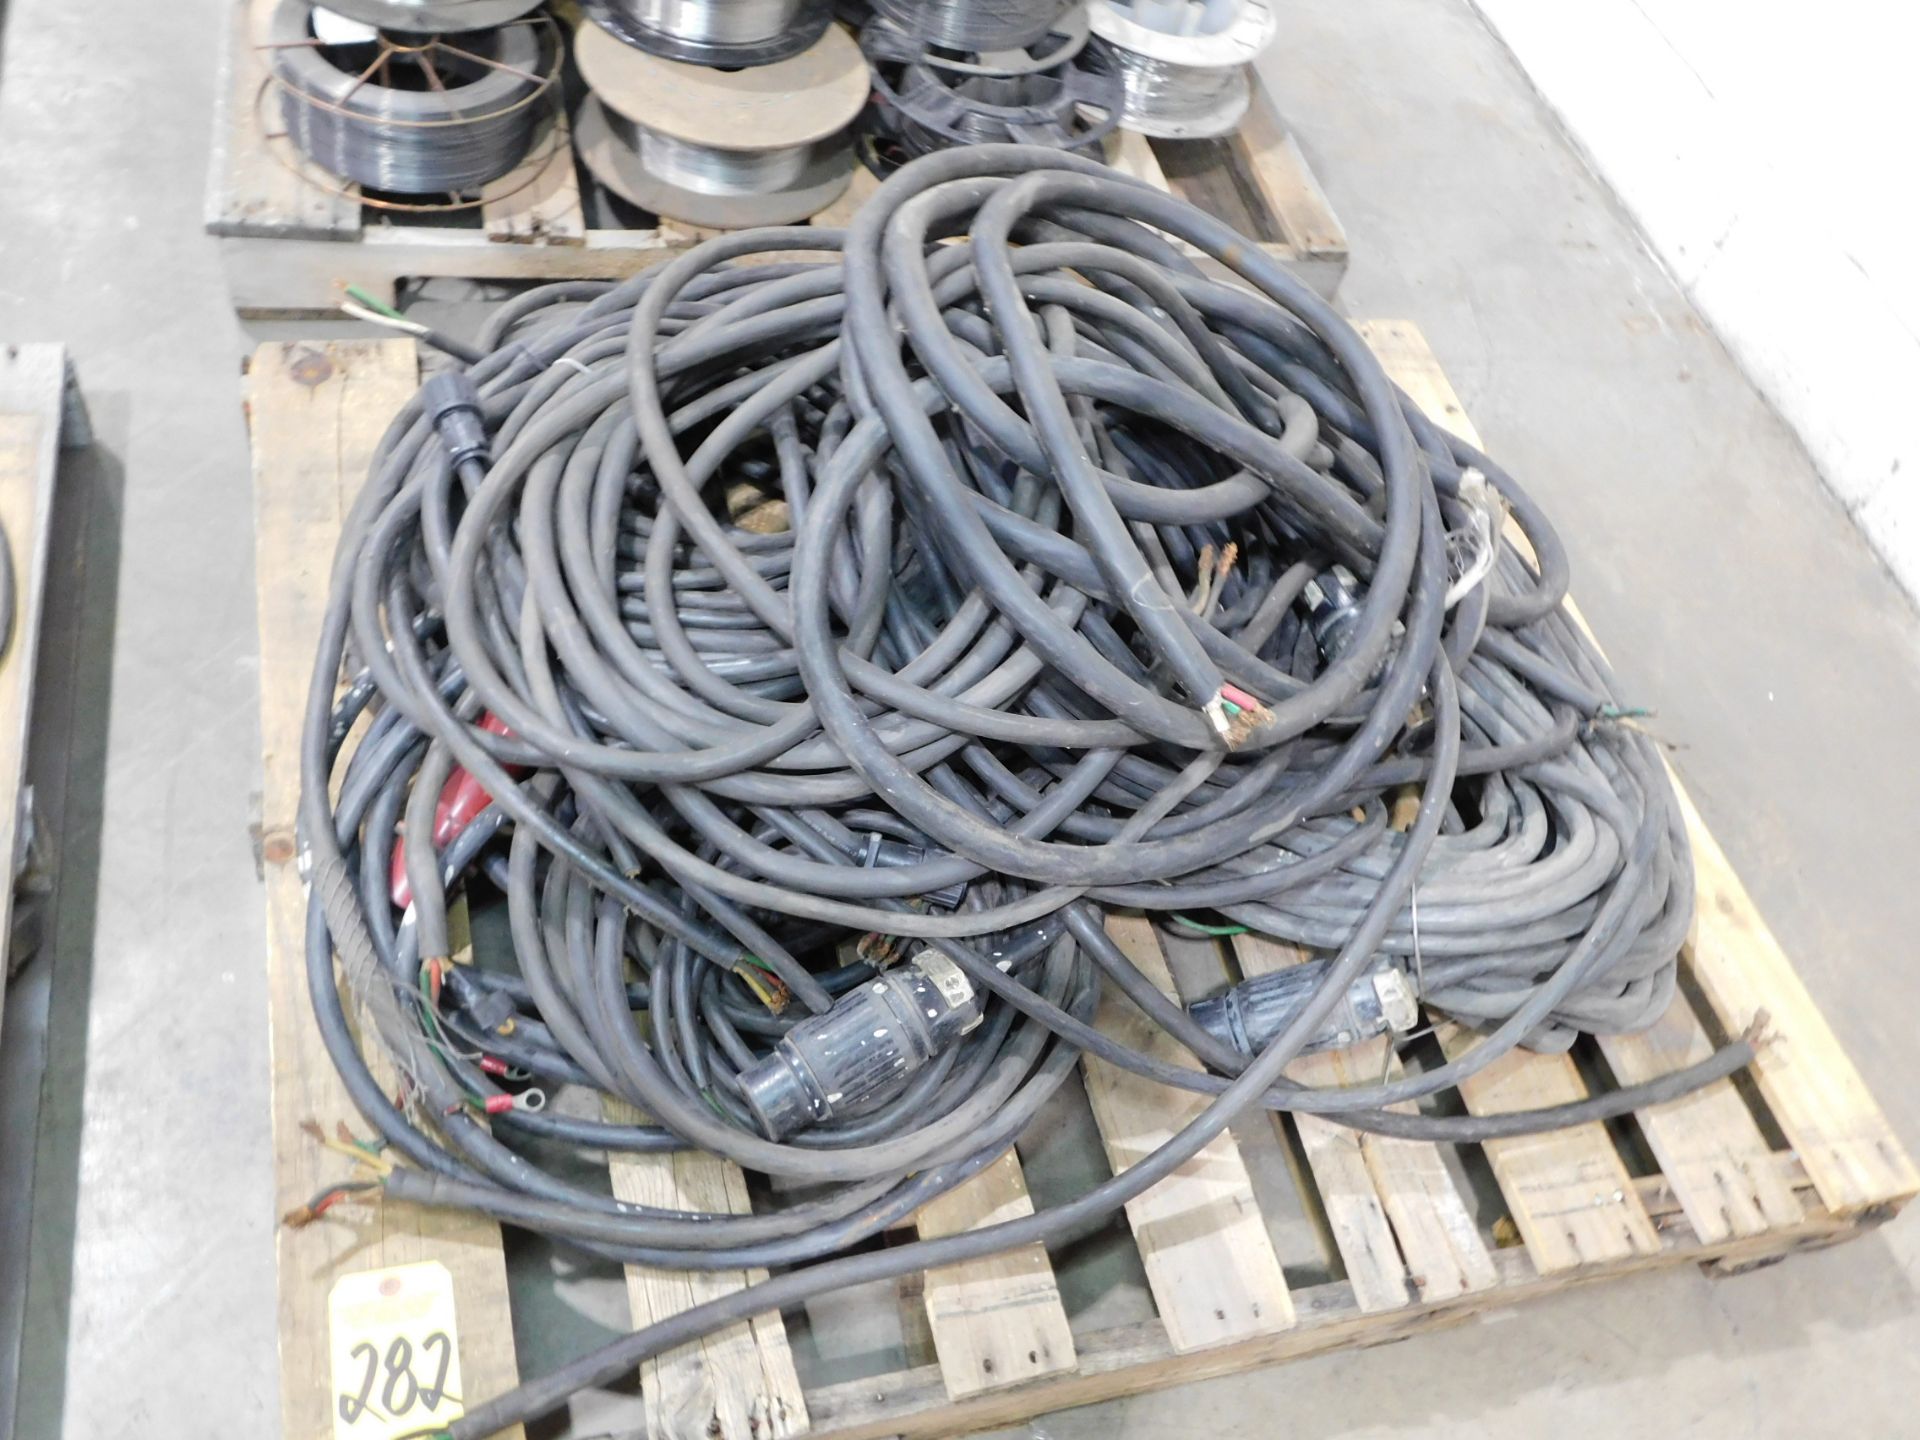 Skid Lot of Welder Extension Cords and Electrical Wire